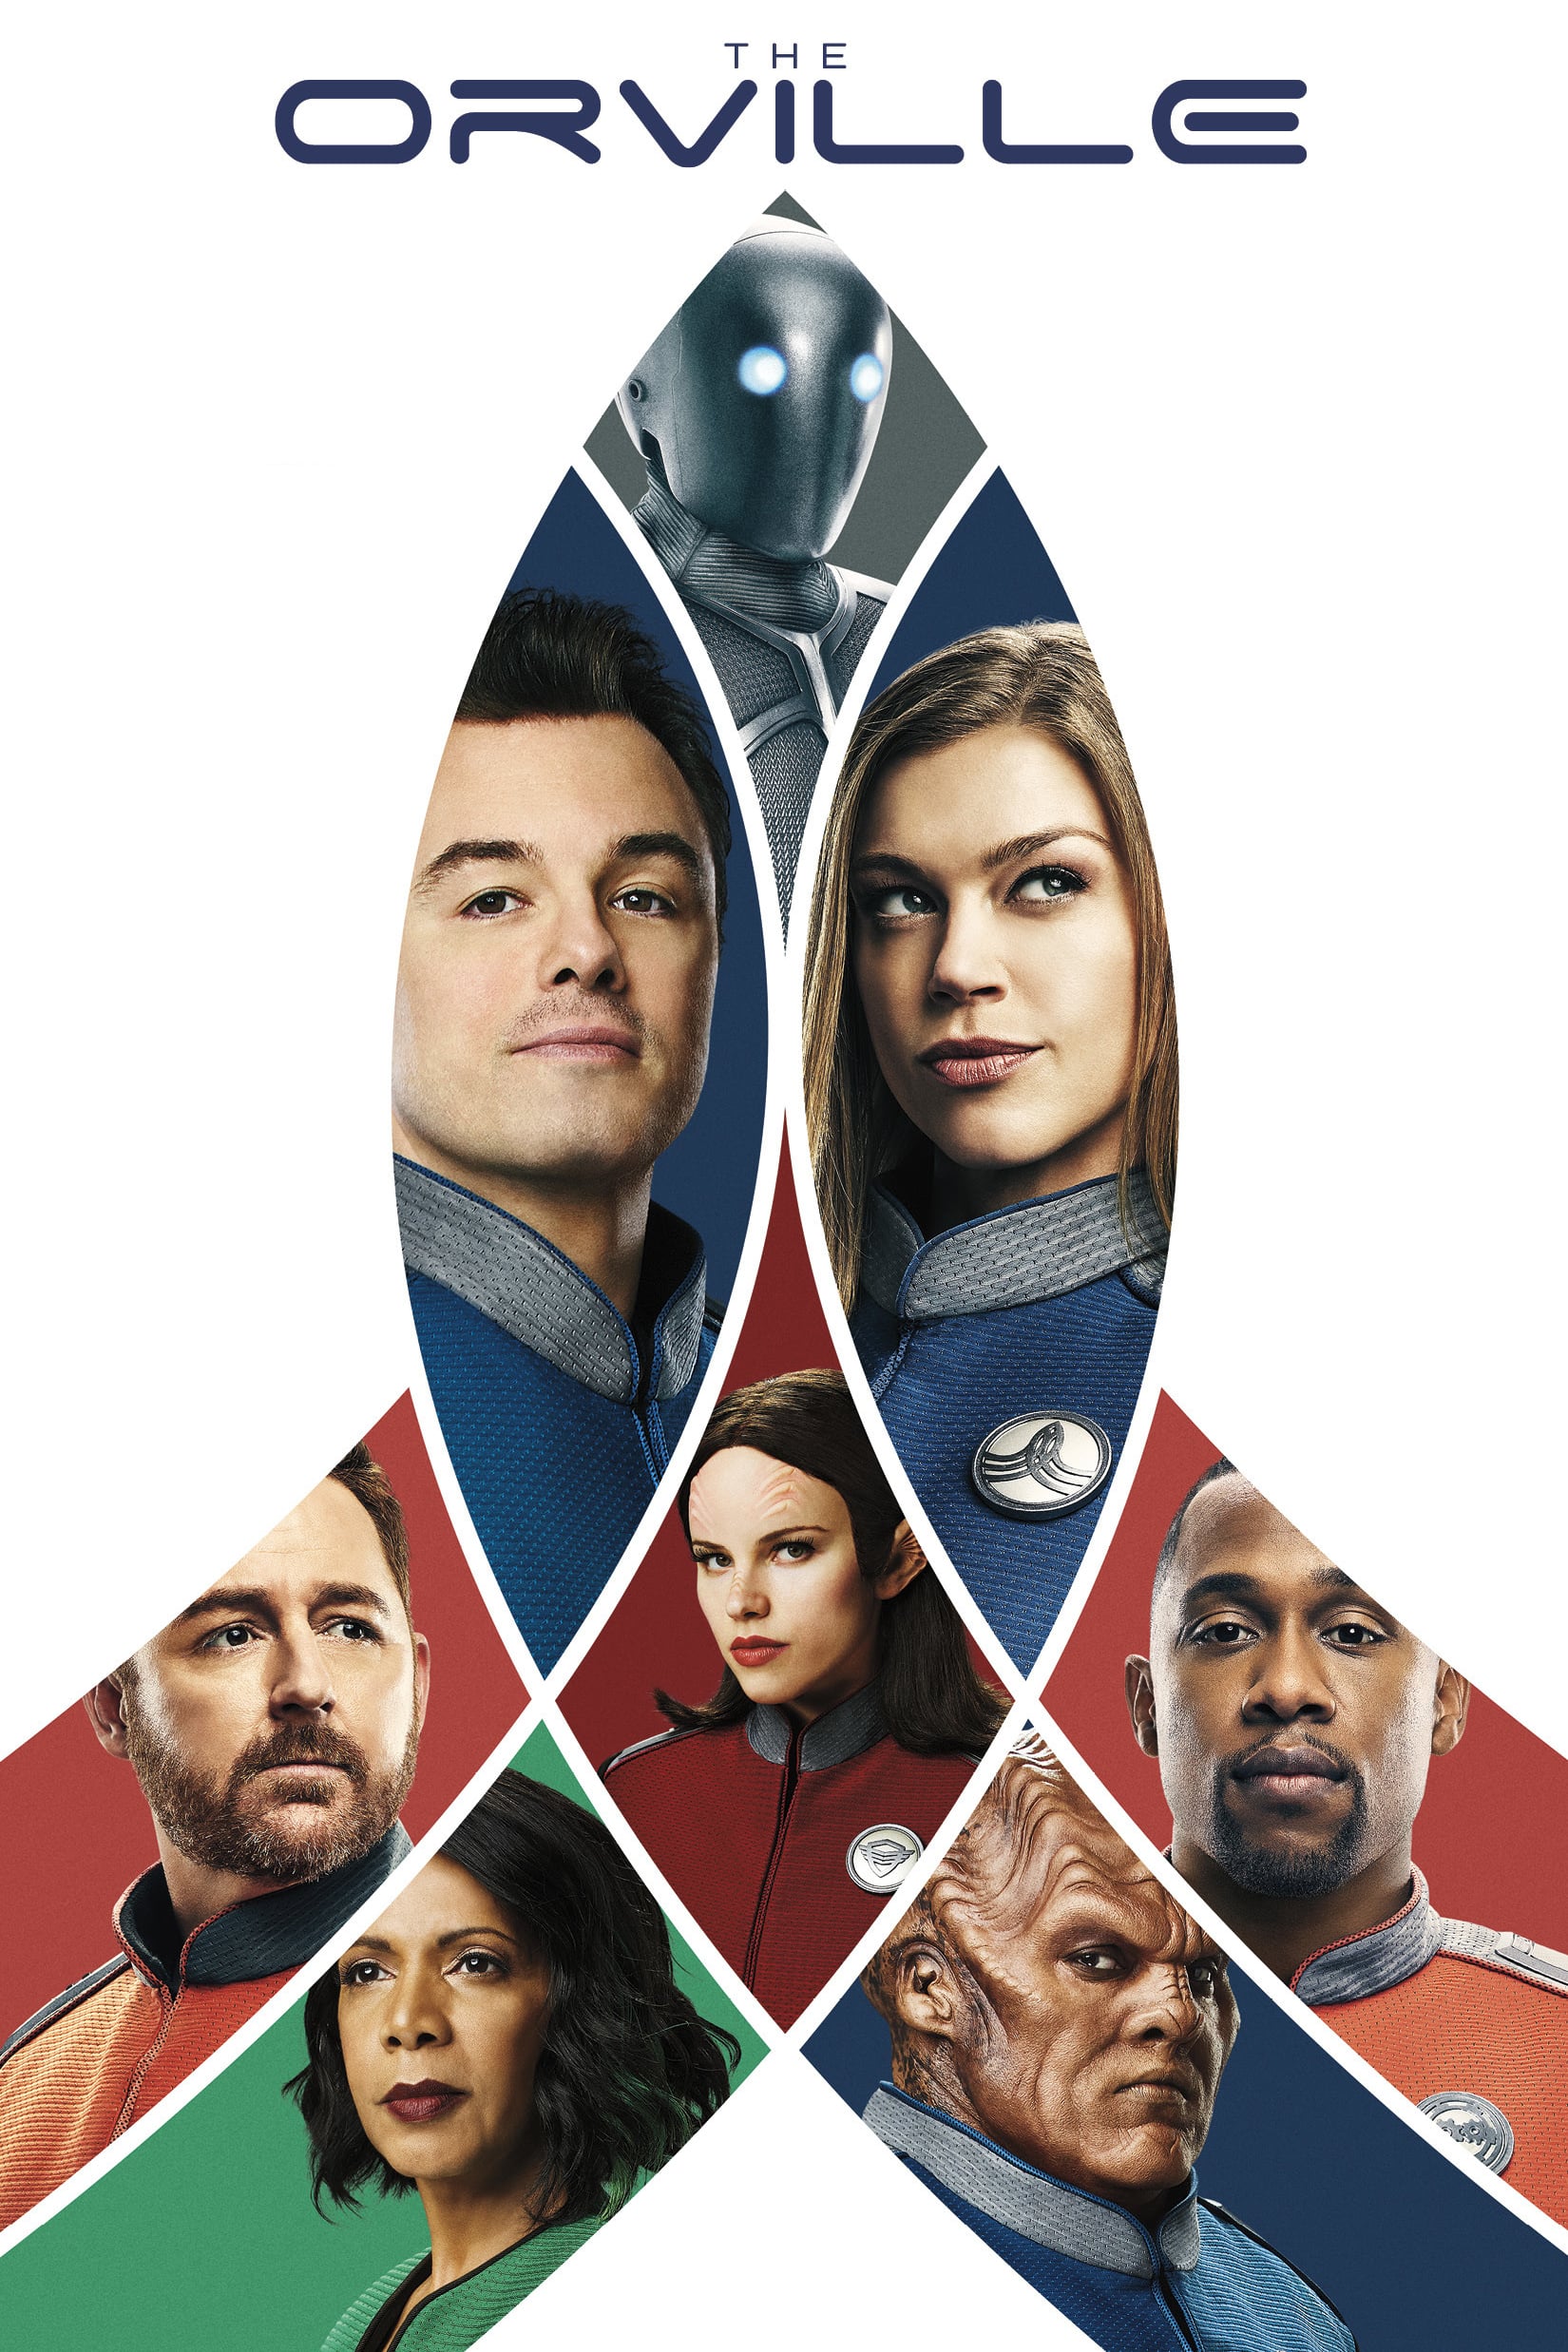 The Orville rating